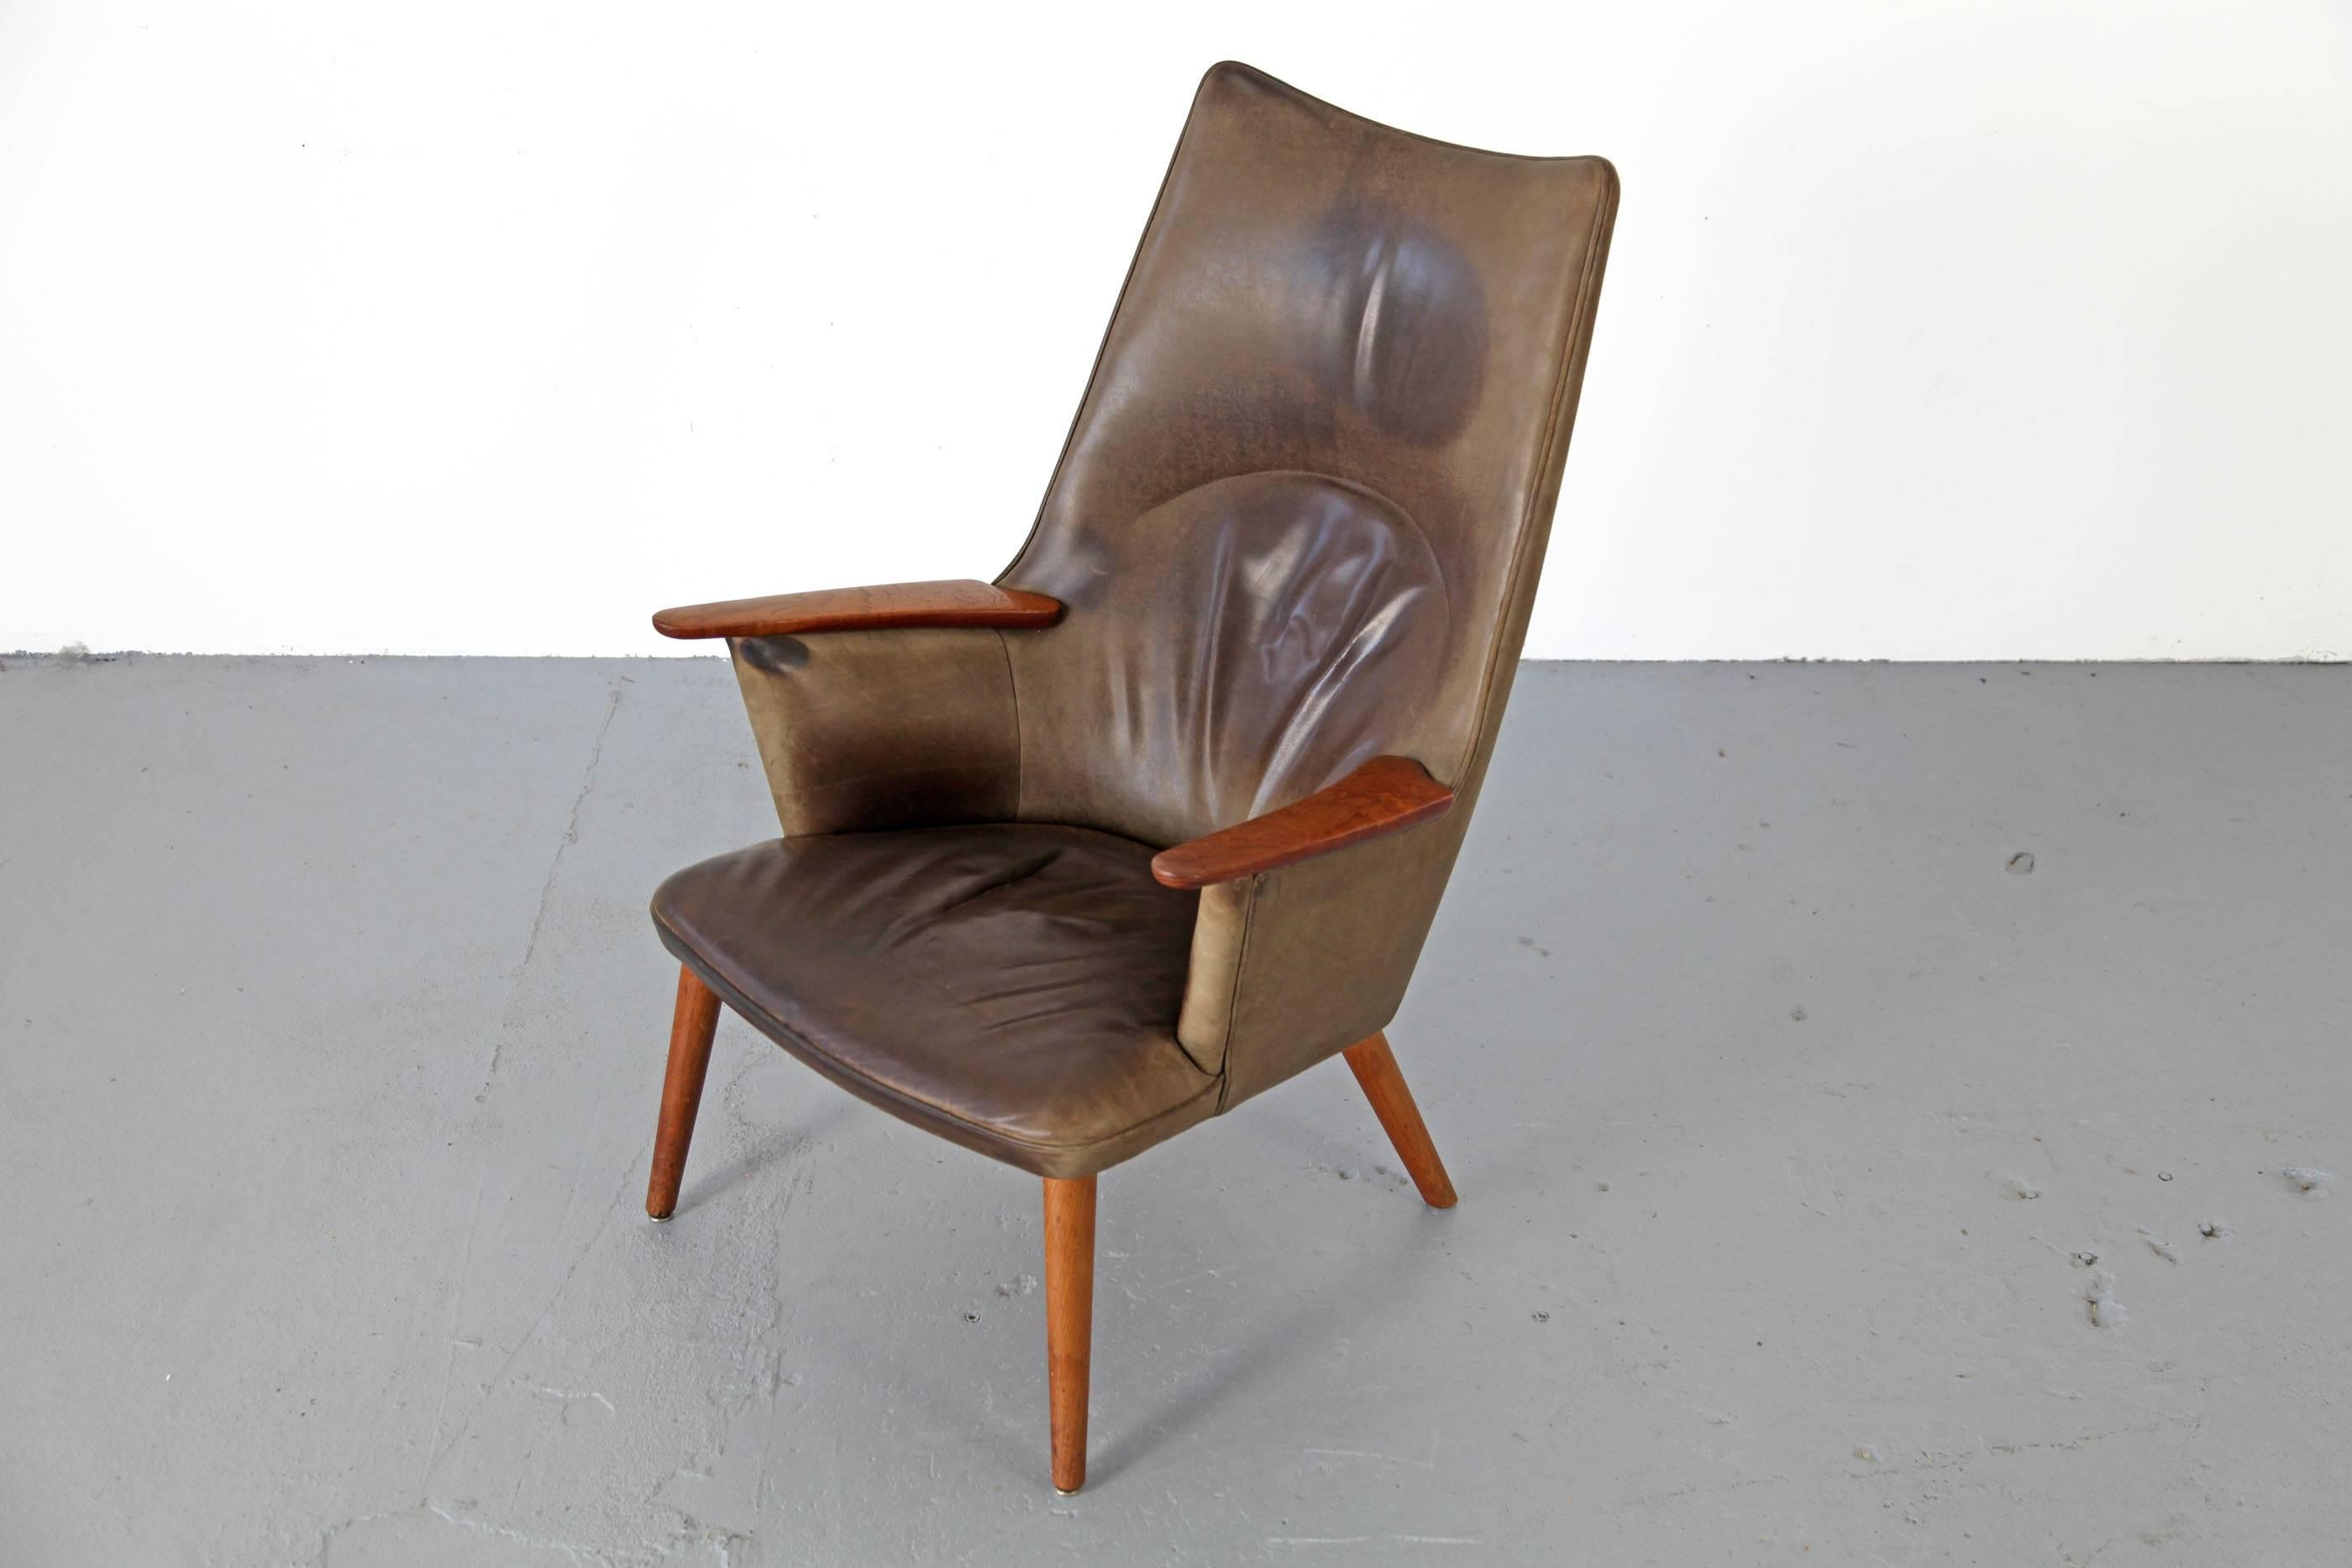 Lounge chair AP 27 by Hans Wegner, manufactured by A.P. Stolen. The chair has been upholstered in high quality leather, which has patinated nicely through decades.

